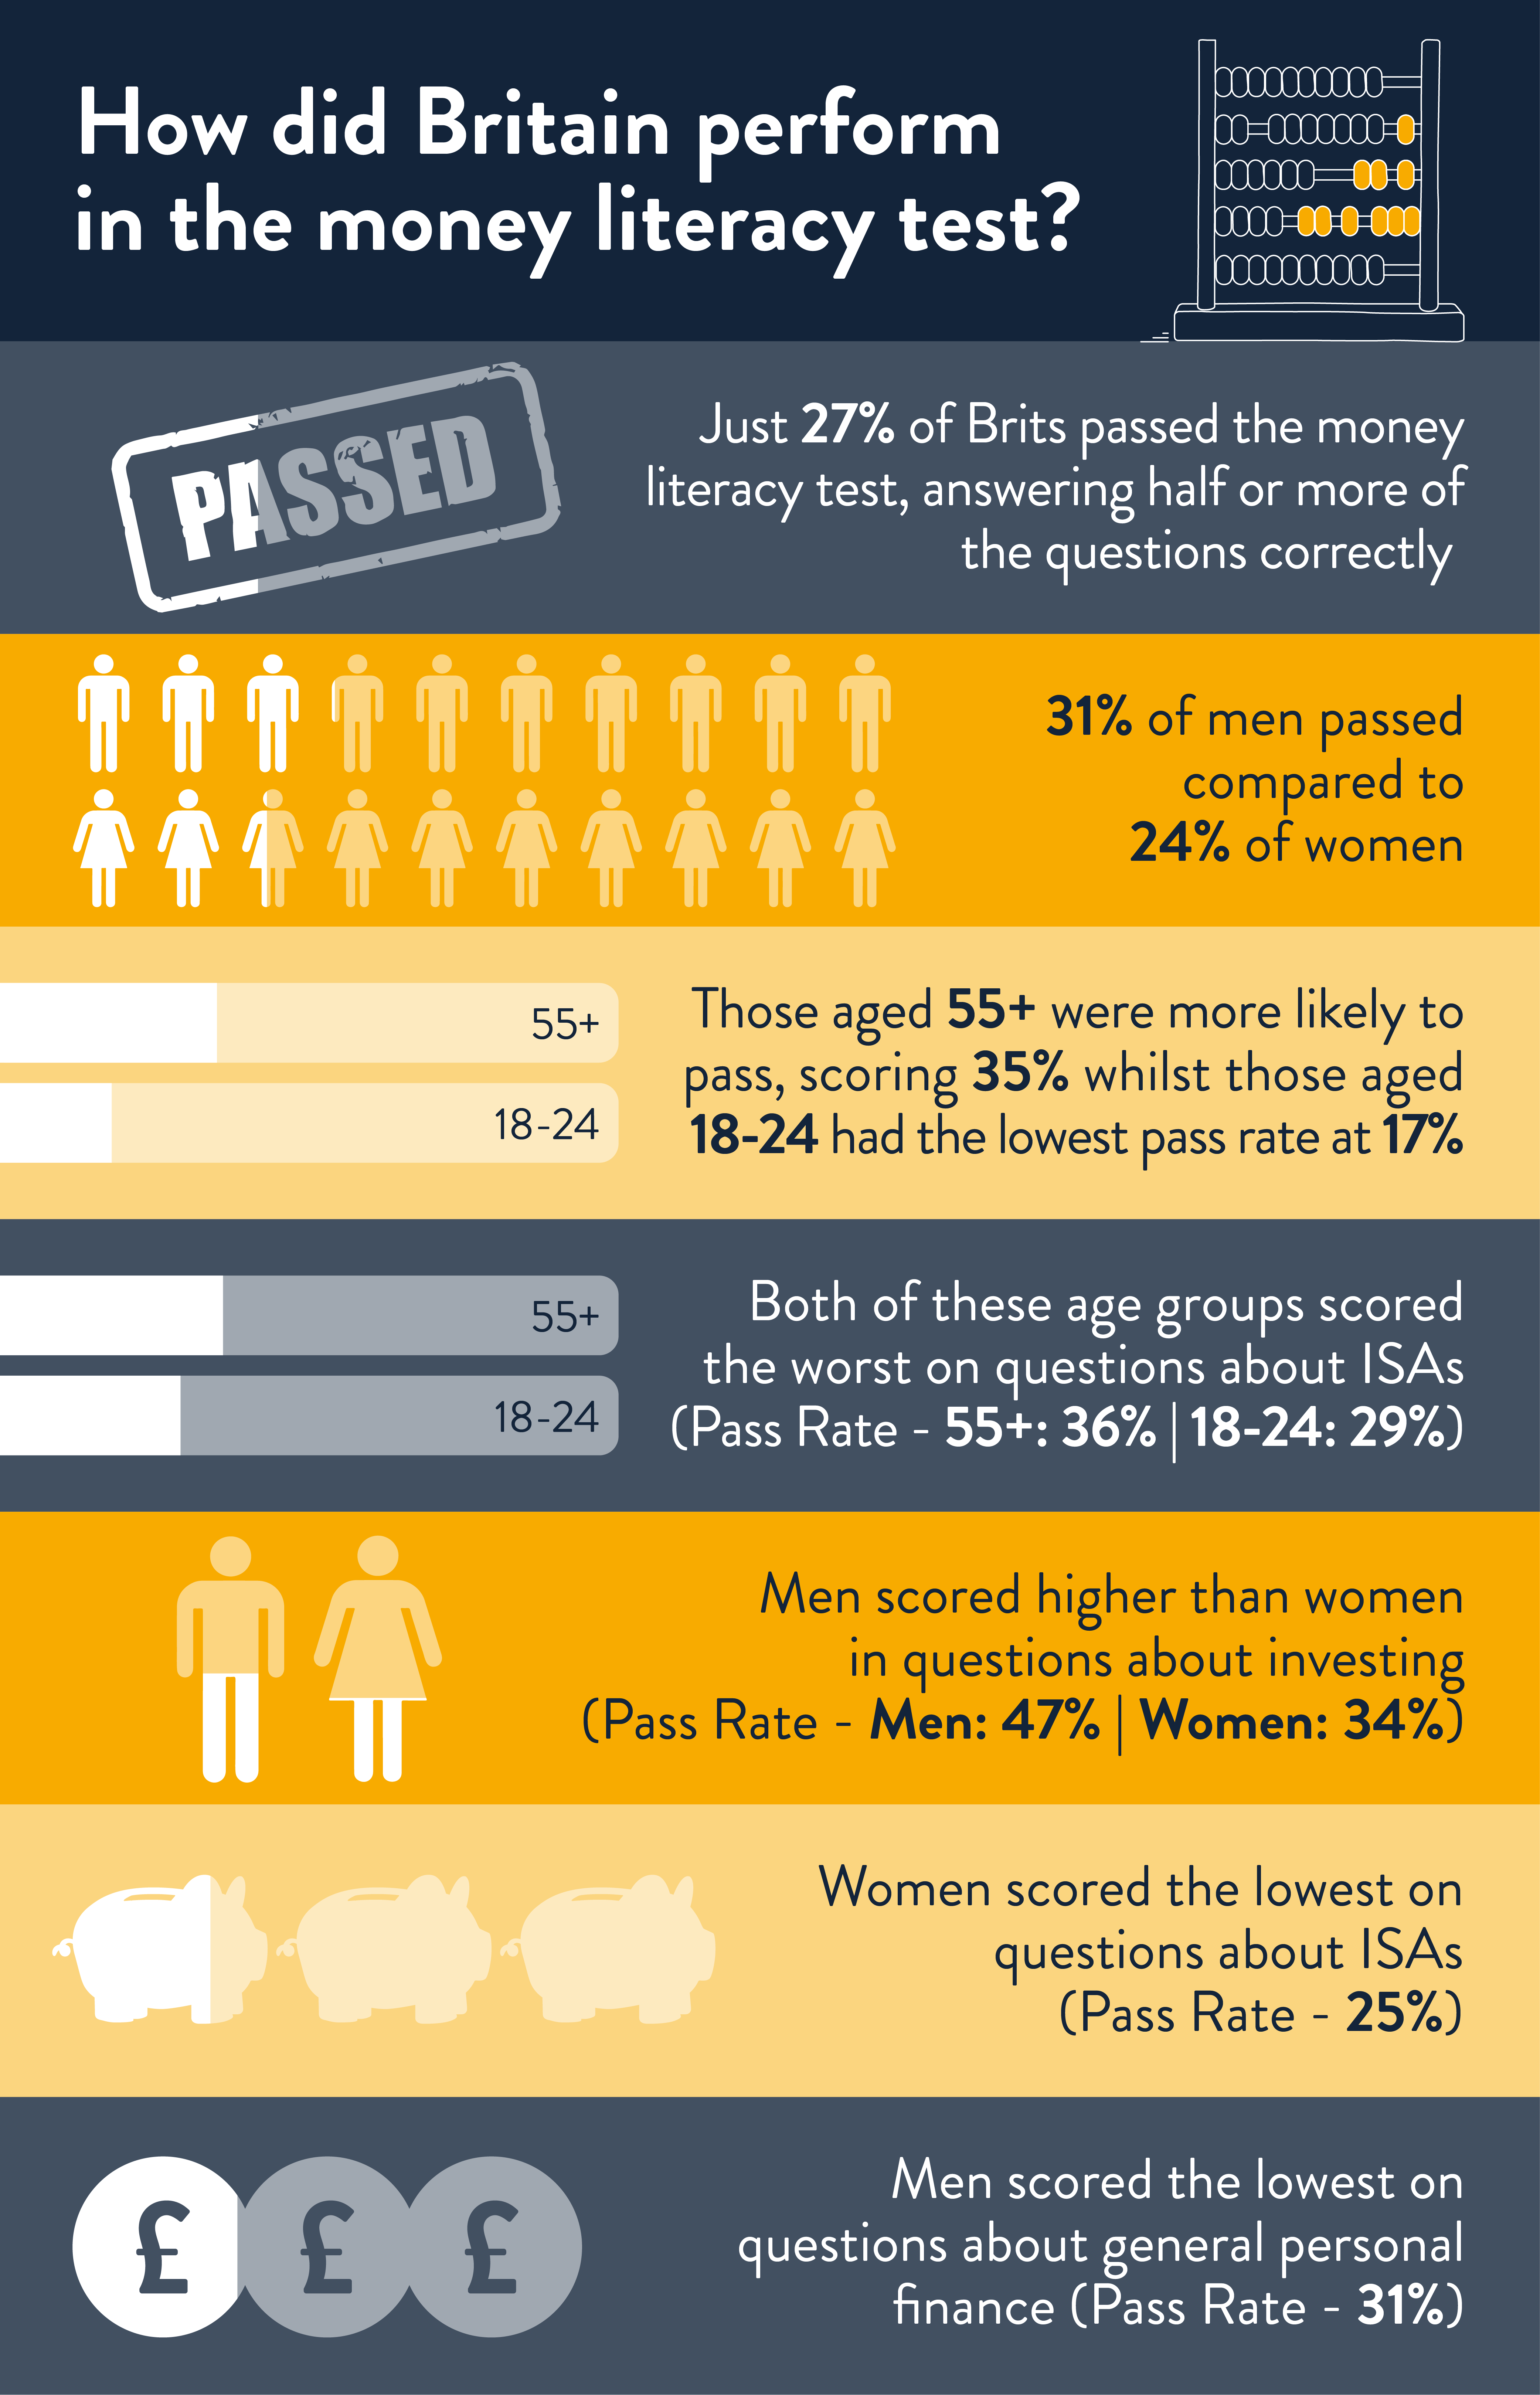 Stats infographic showing how surveyed British people performed in the Money Literacy Test